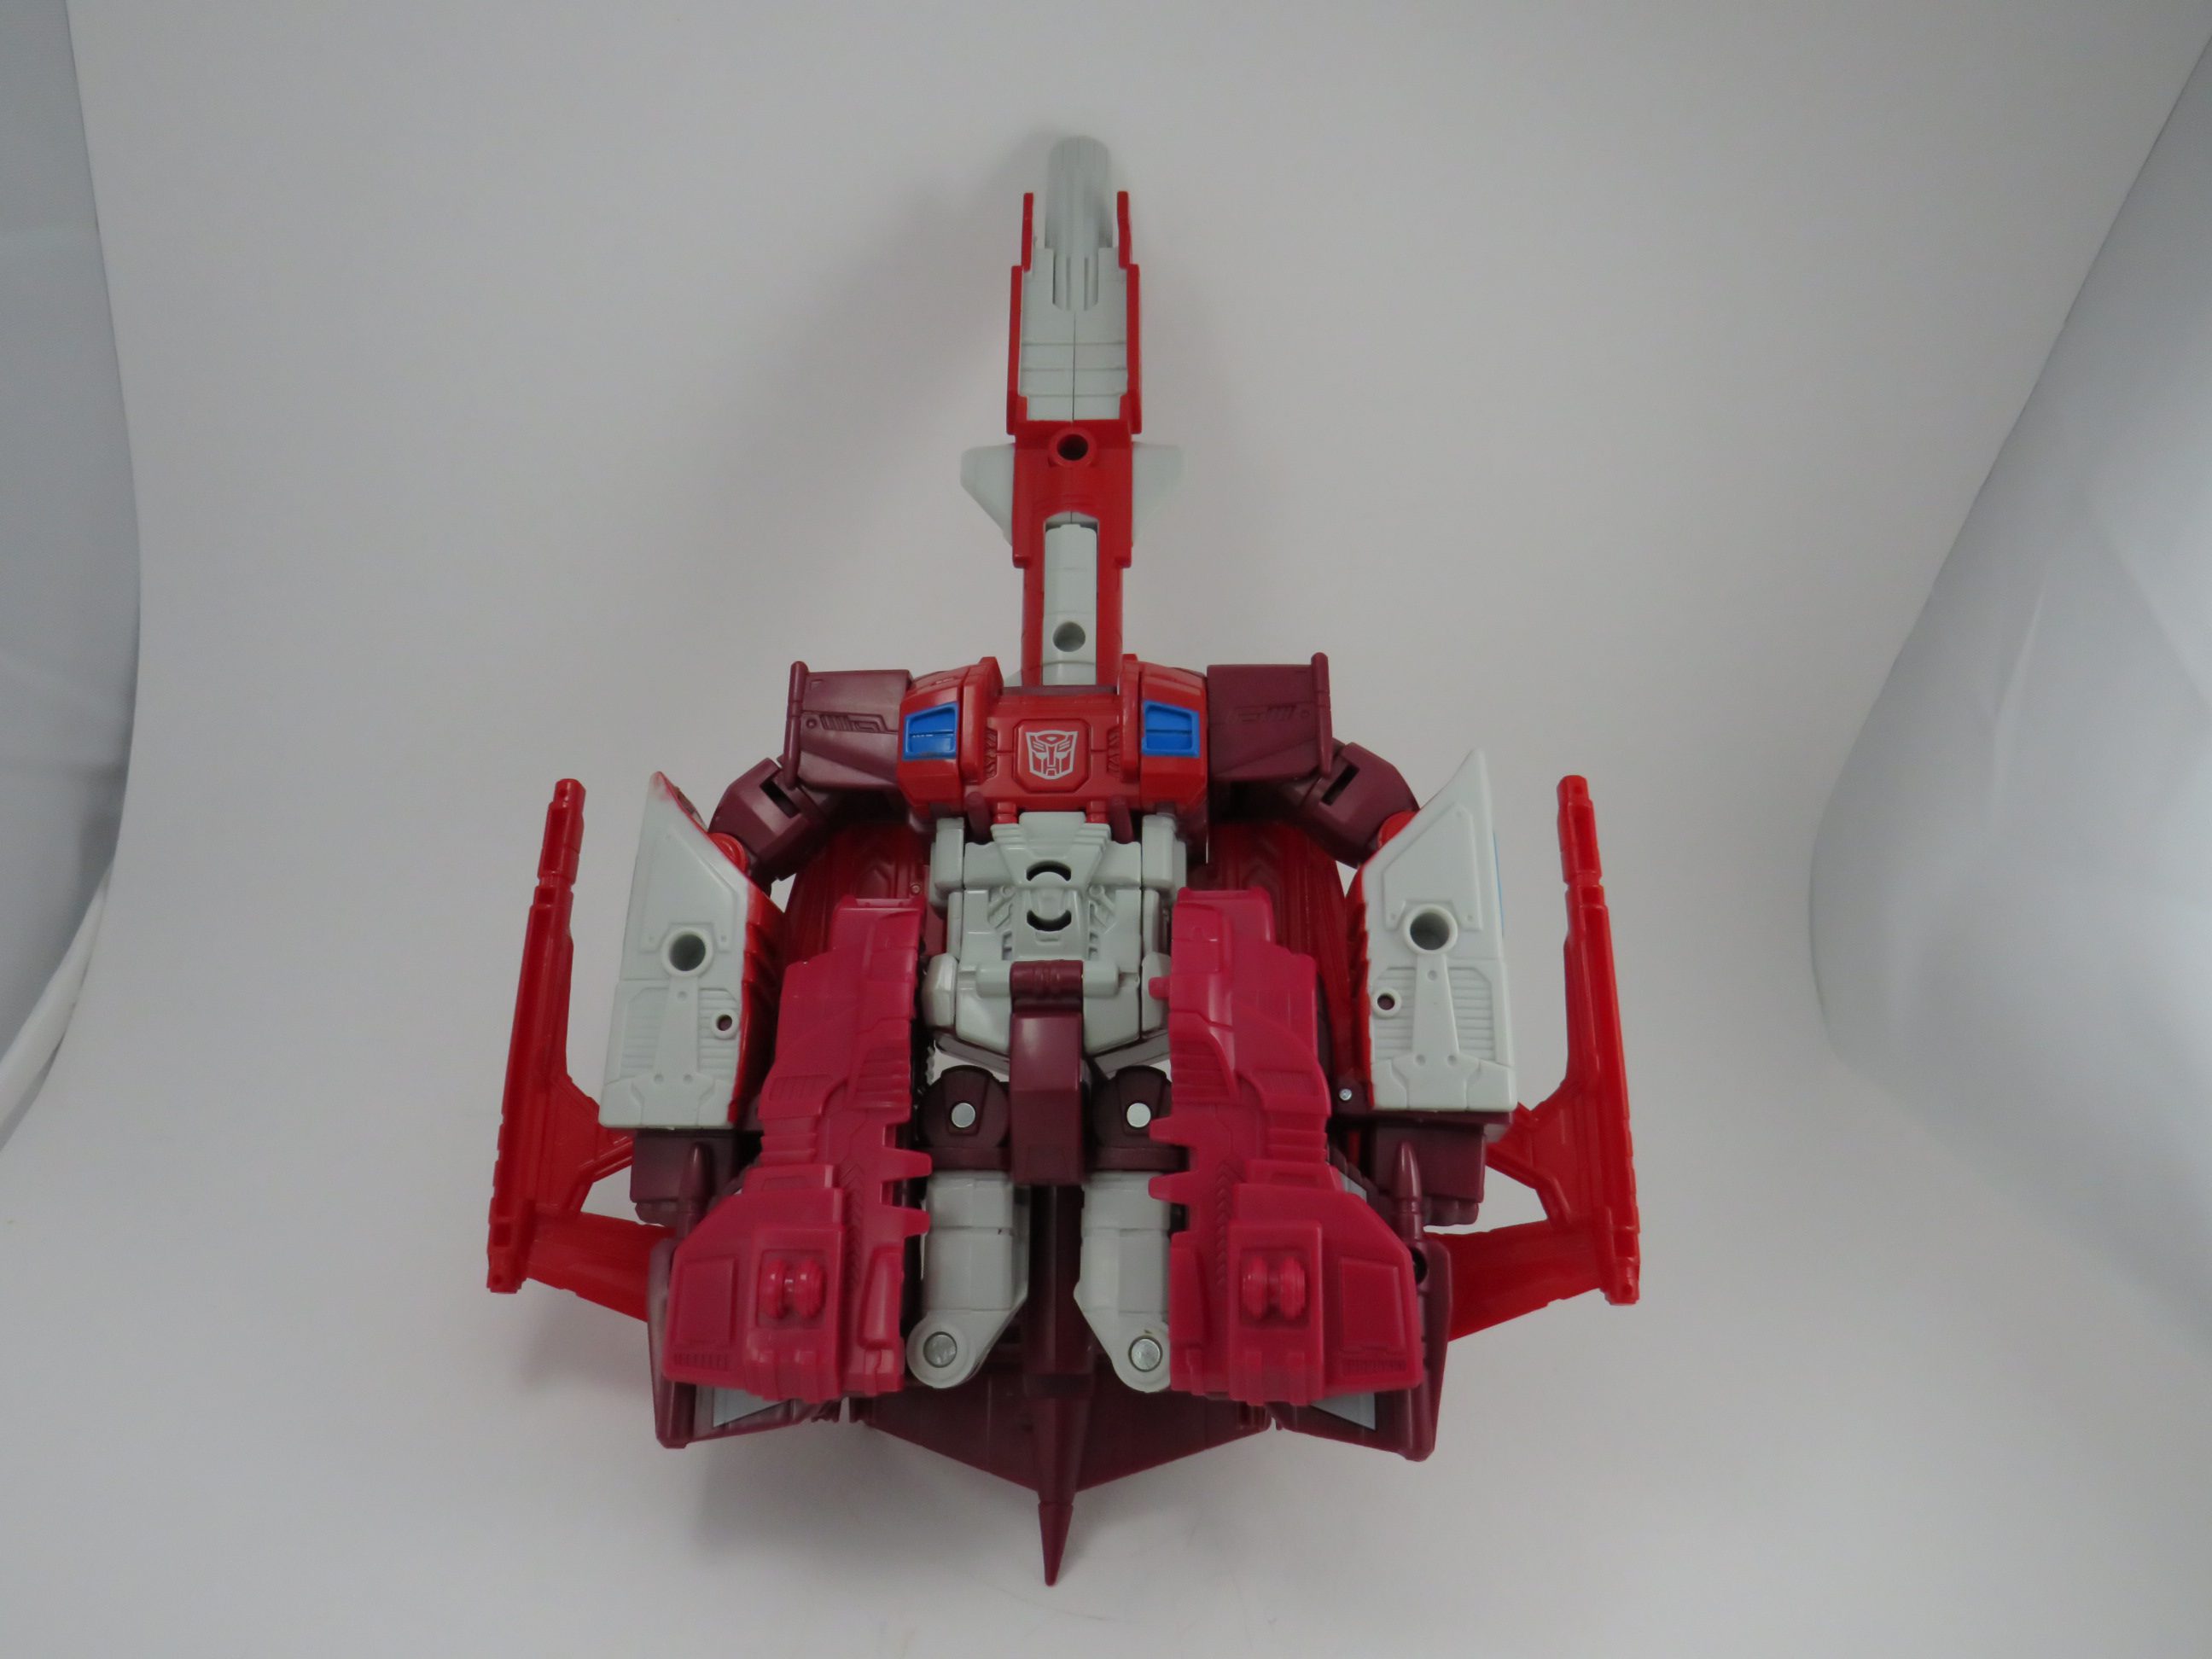 Alternate mode. (Scattershot from the Computron gift set)